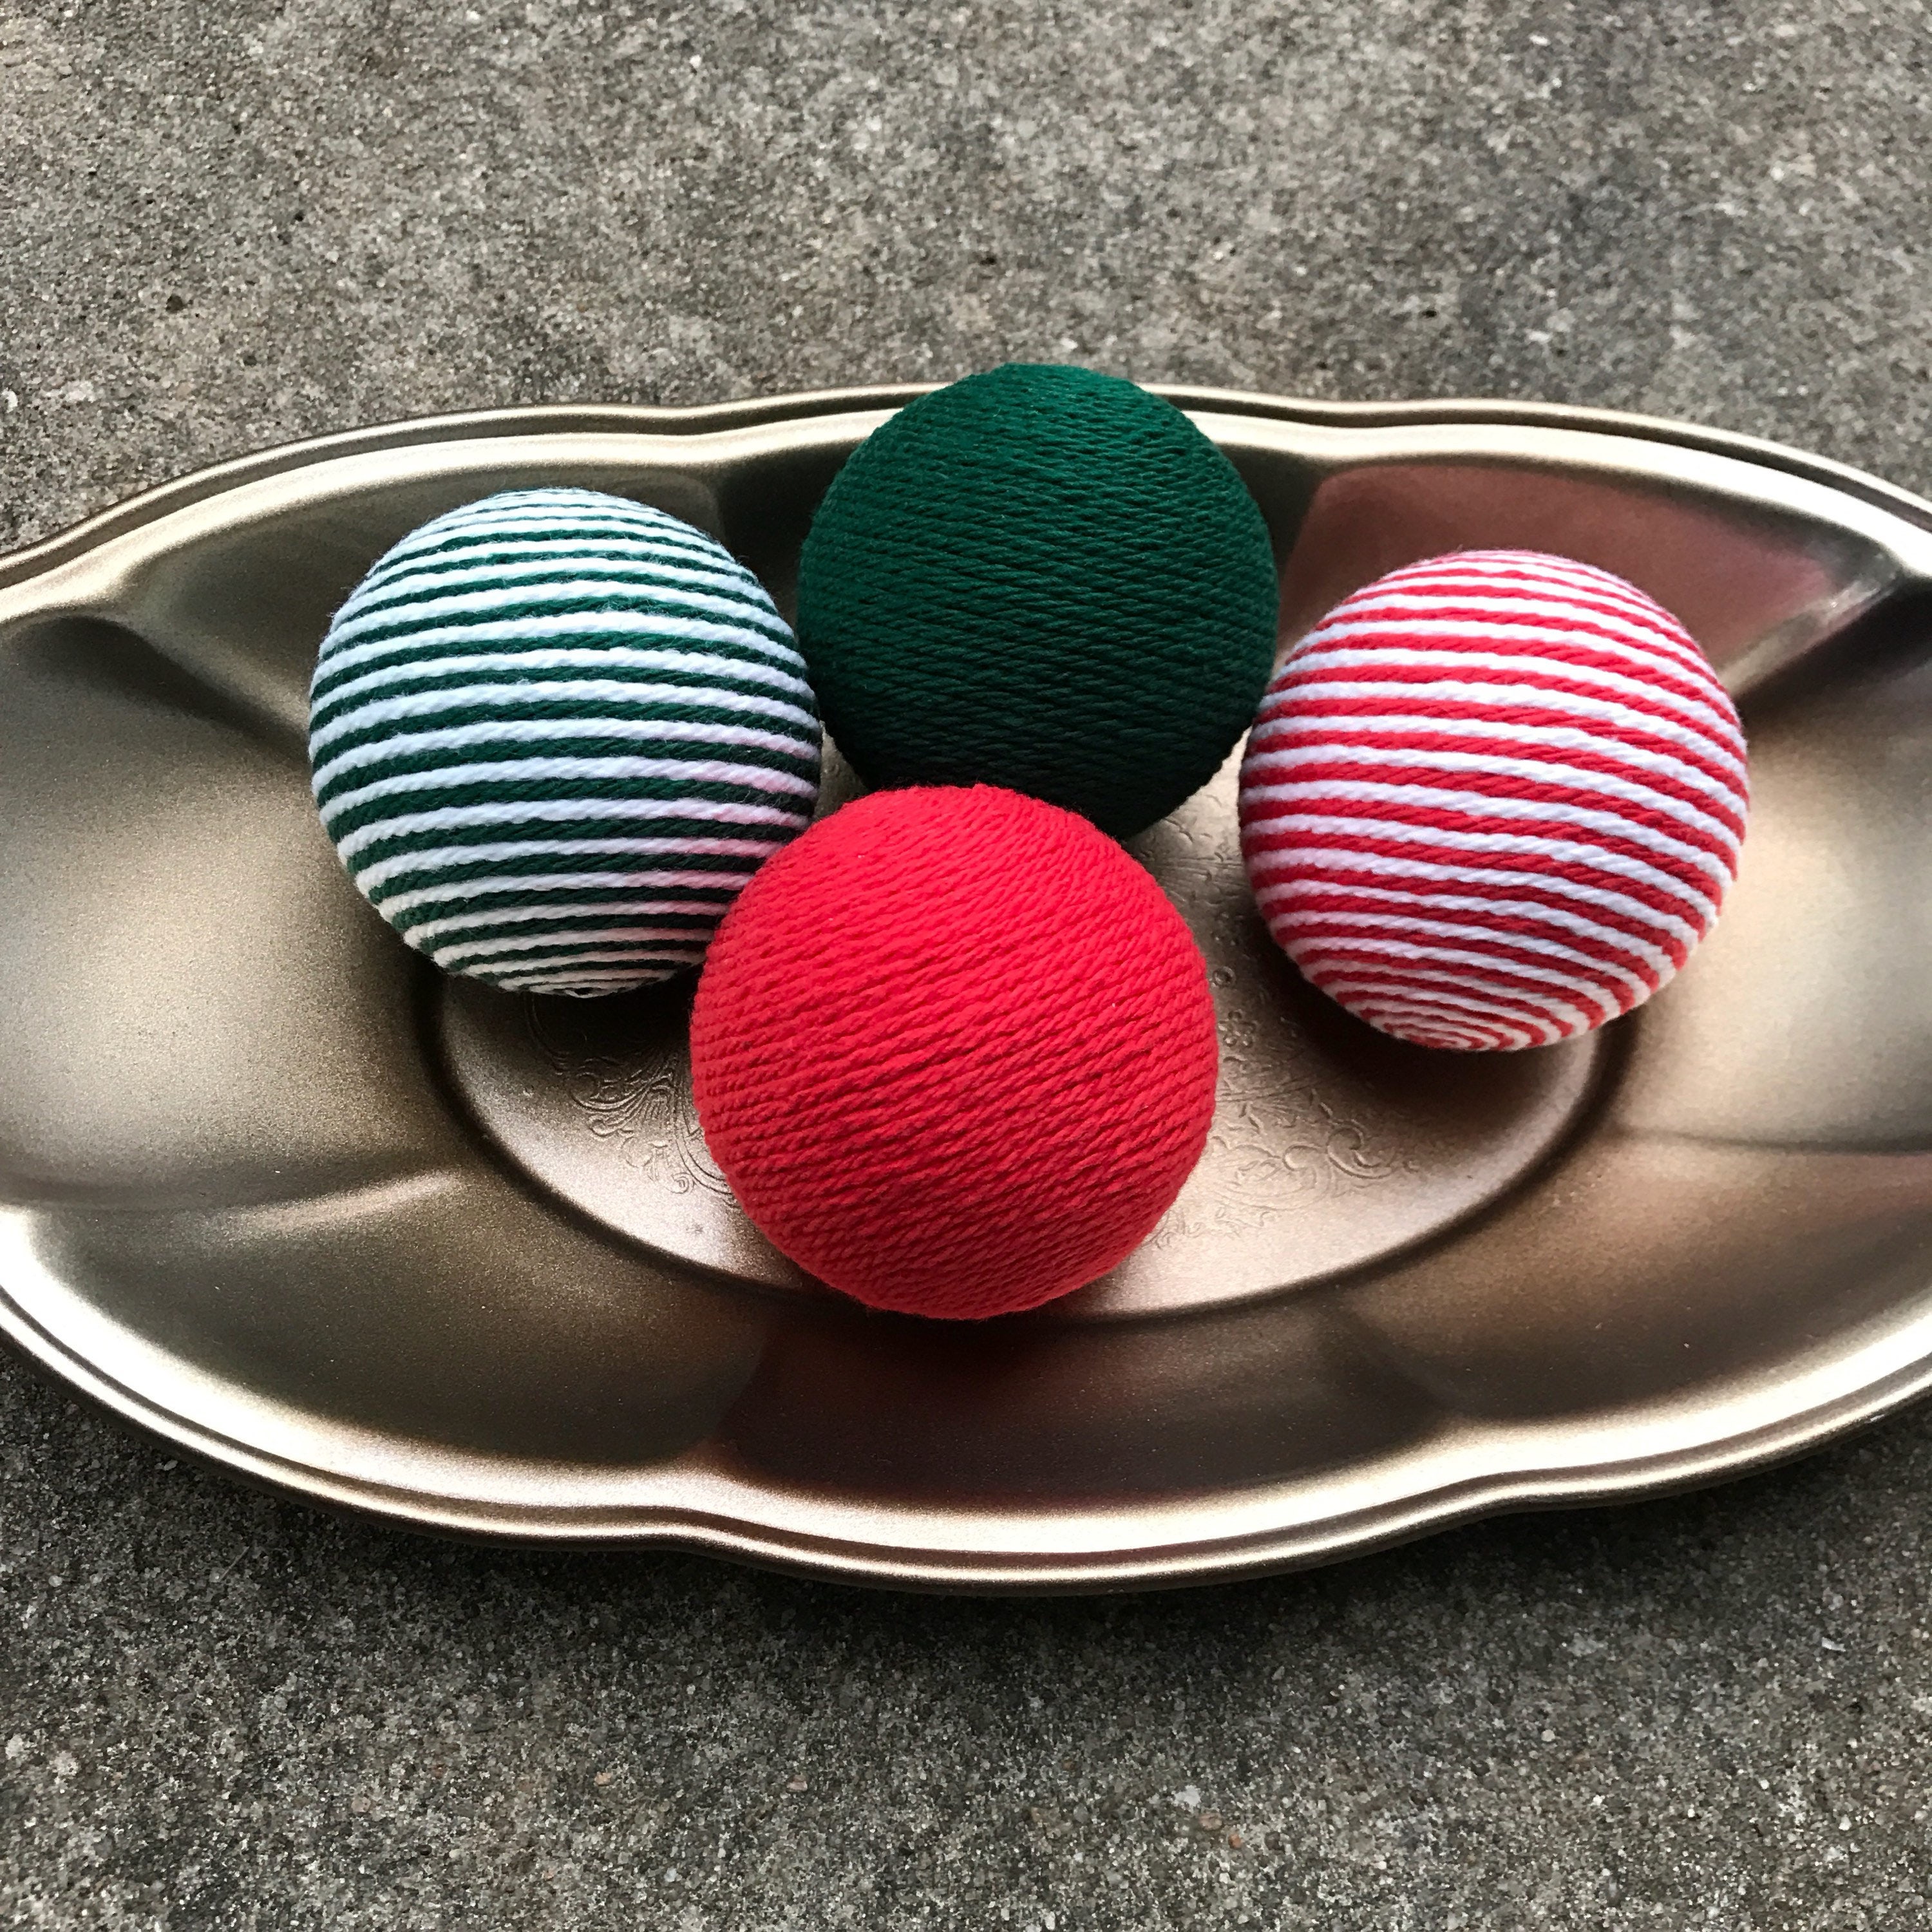 Red Green and White Yarn Balls Holiday Bowl Fillers | Etsy